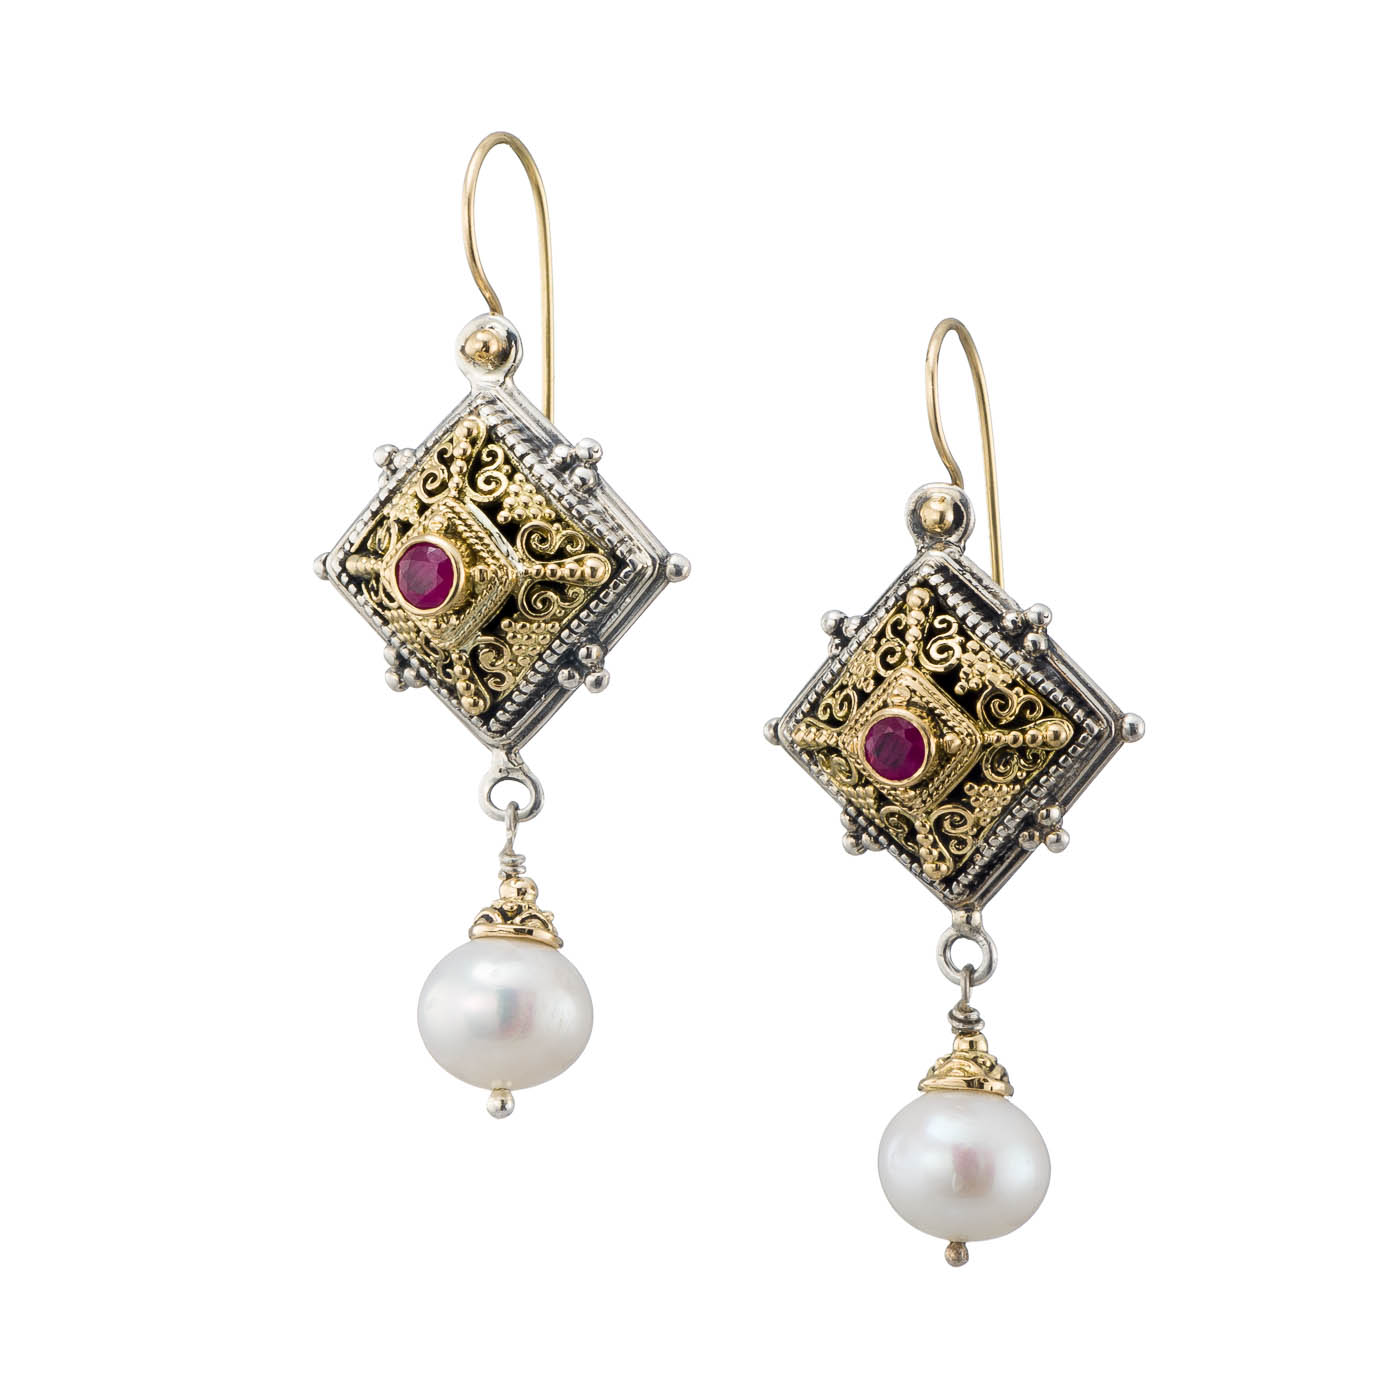 Byzantine long earrings in 18K Gold and sterling silver with ruby